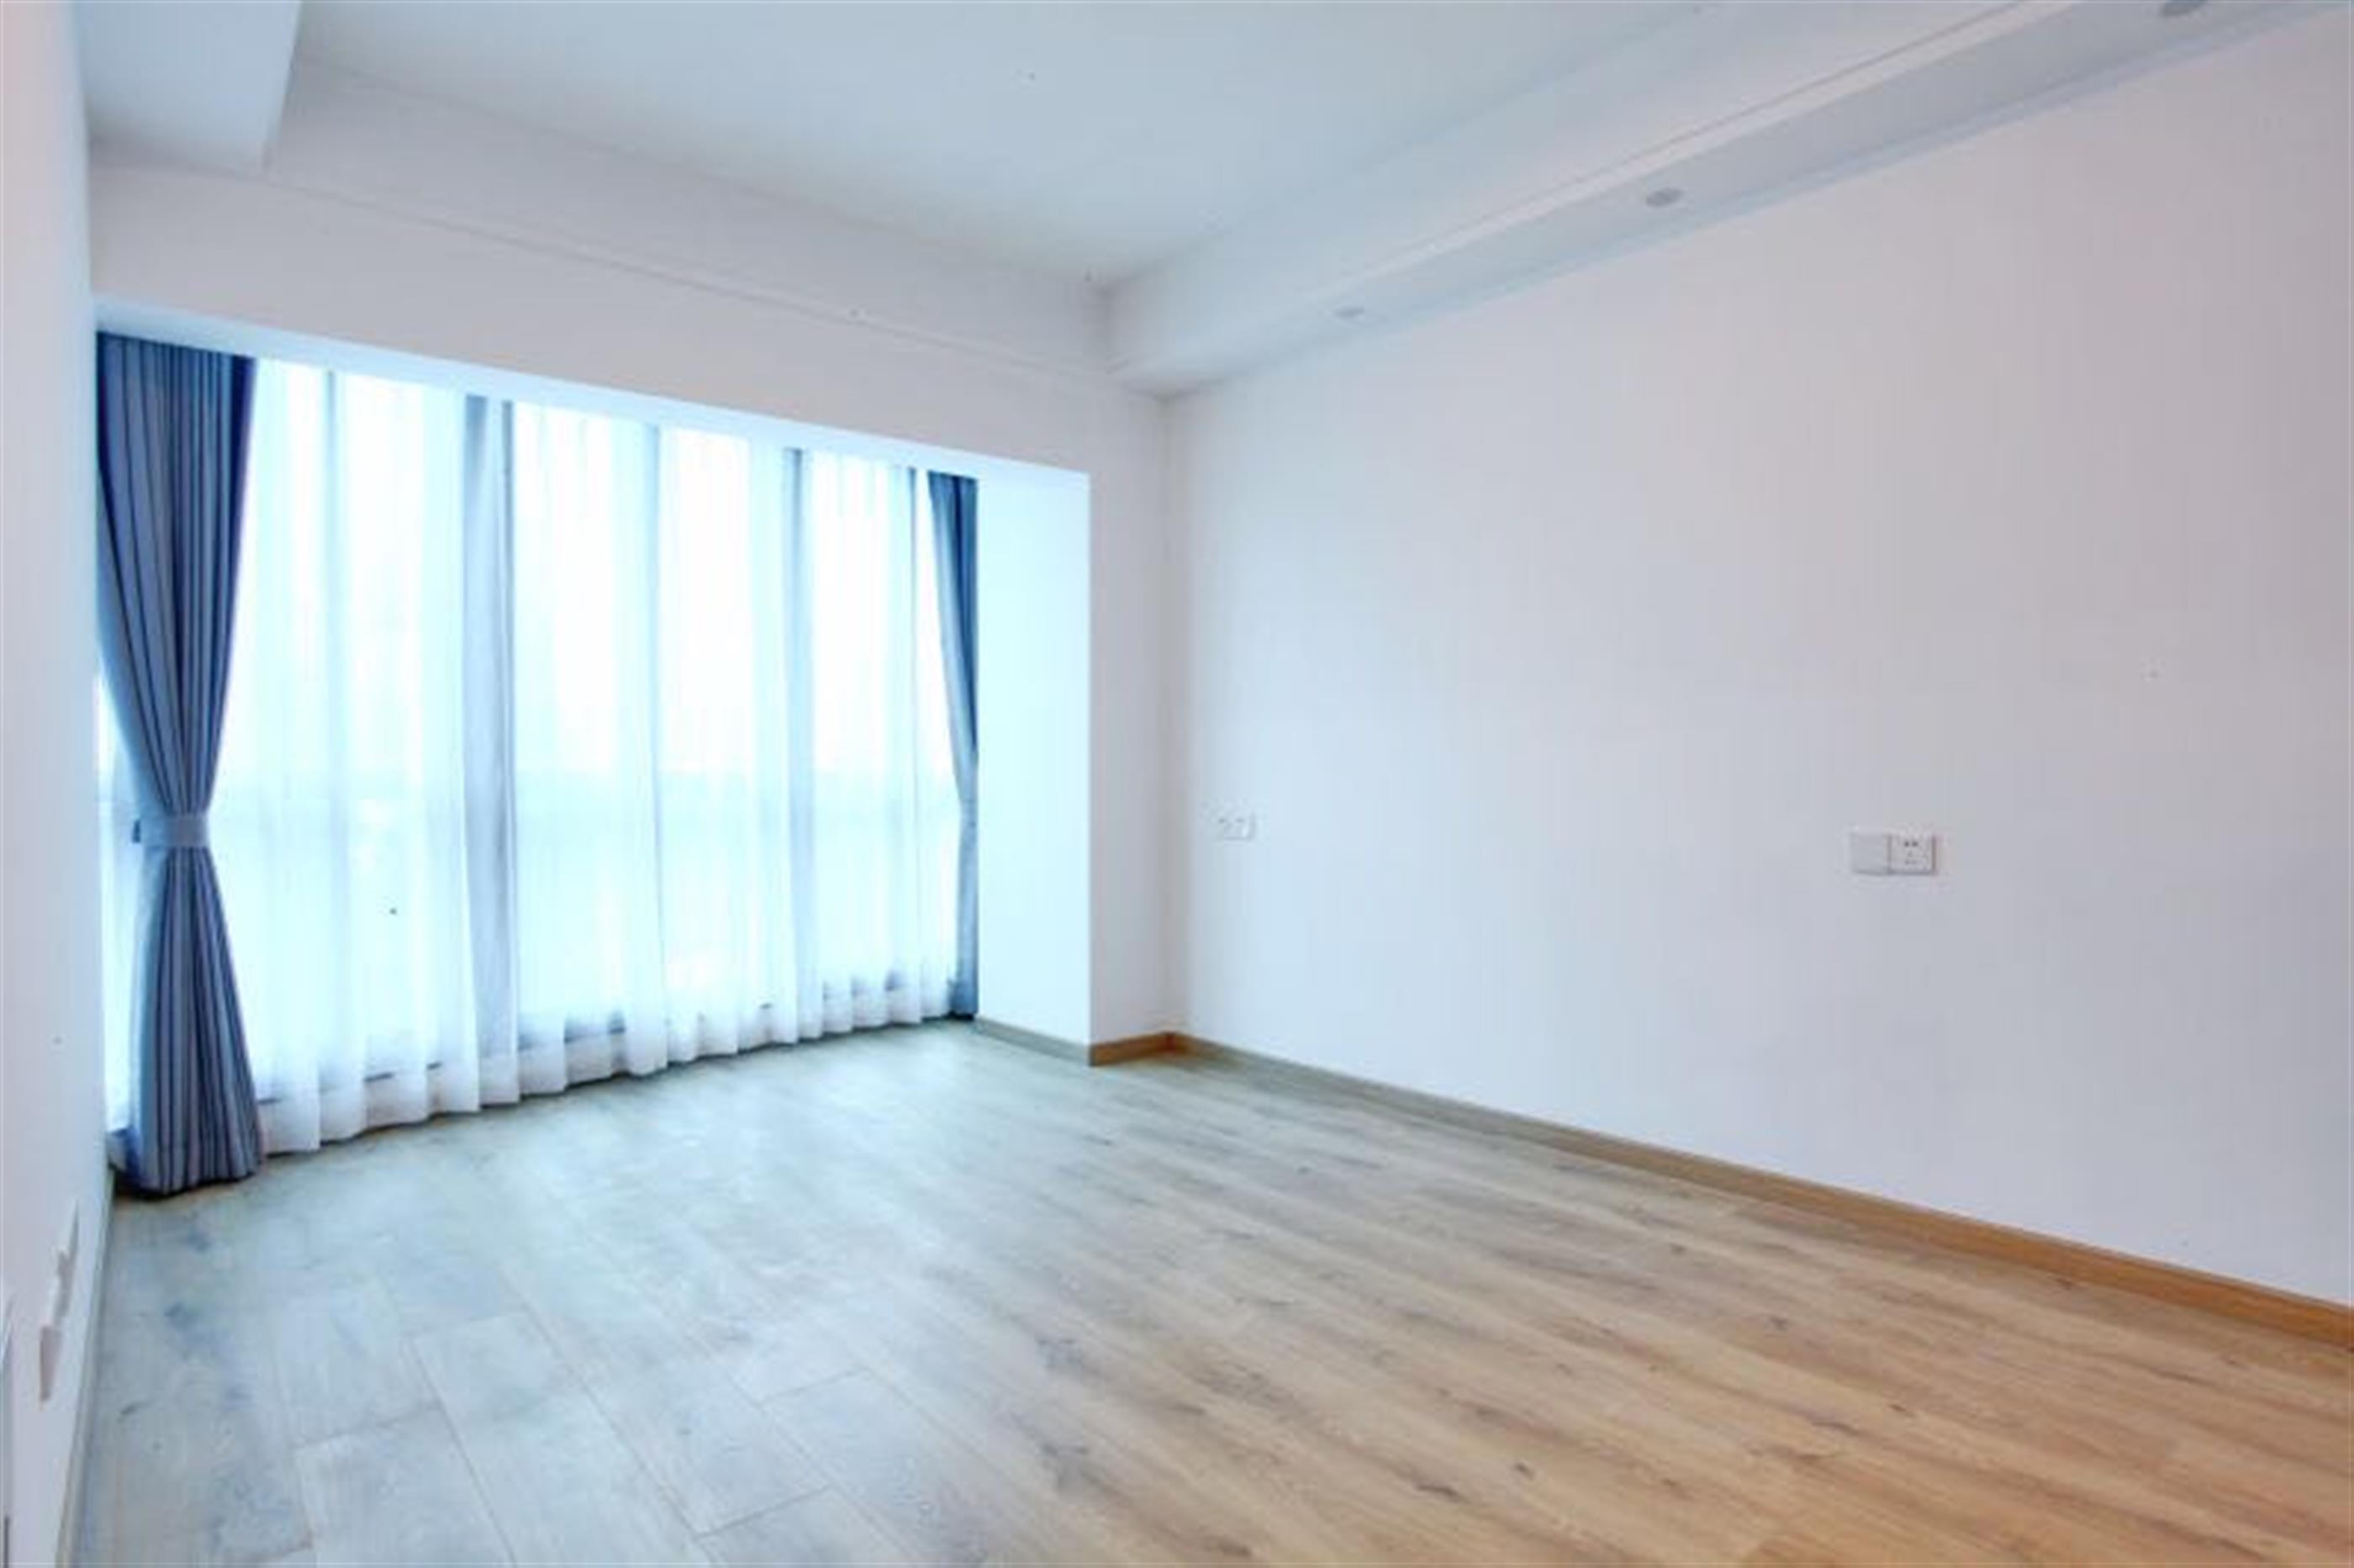 sunny balcony Newly Renovated Spacious 3BR Apt Nr Parks & Ln 2/11 for Rent in Shanghai